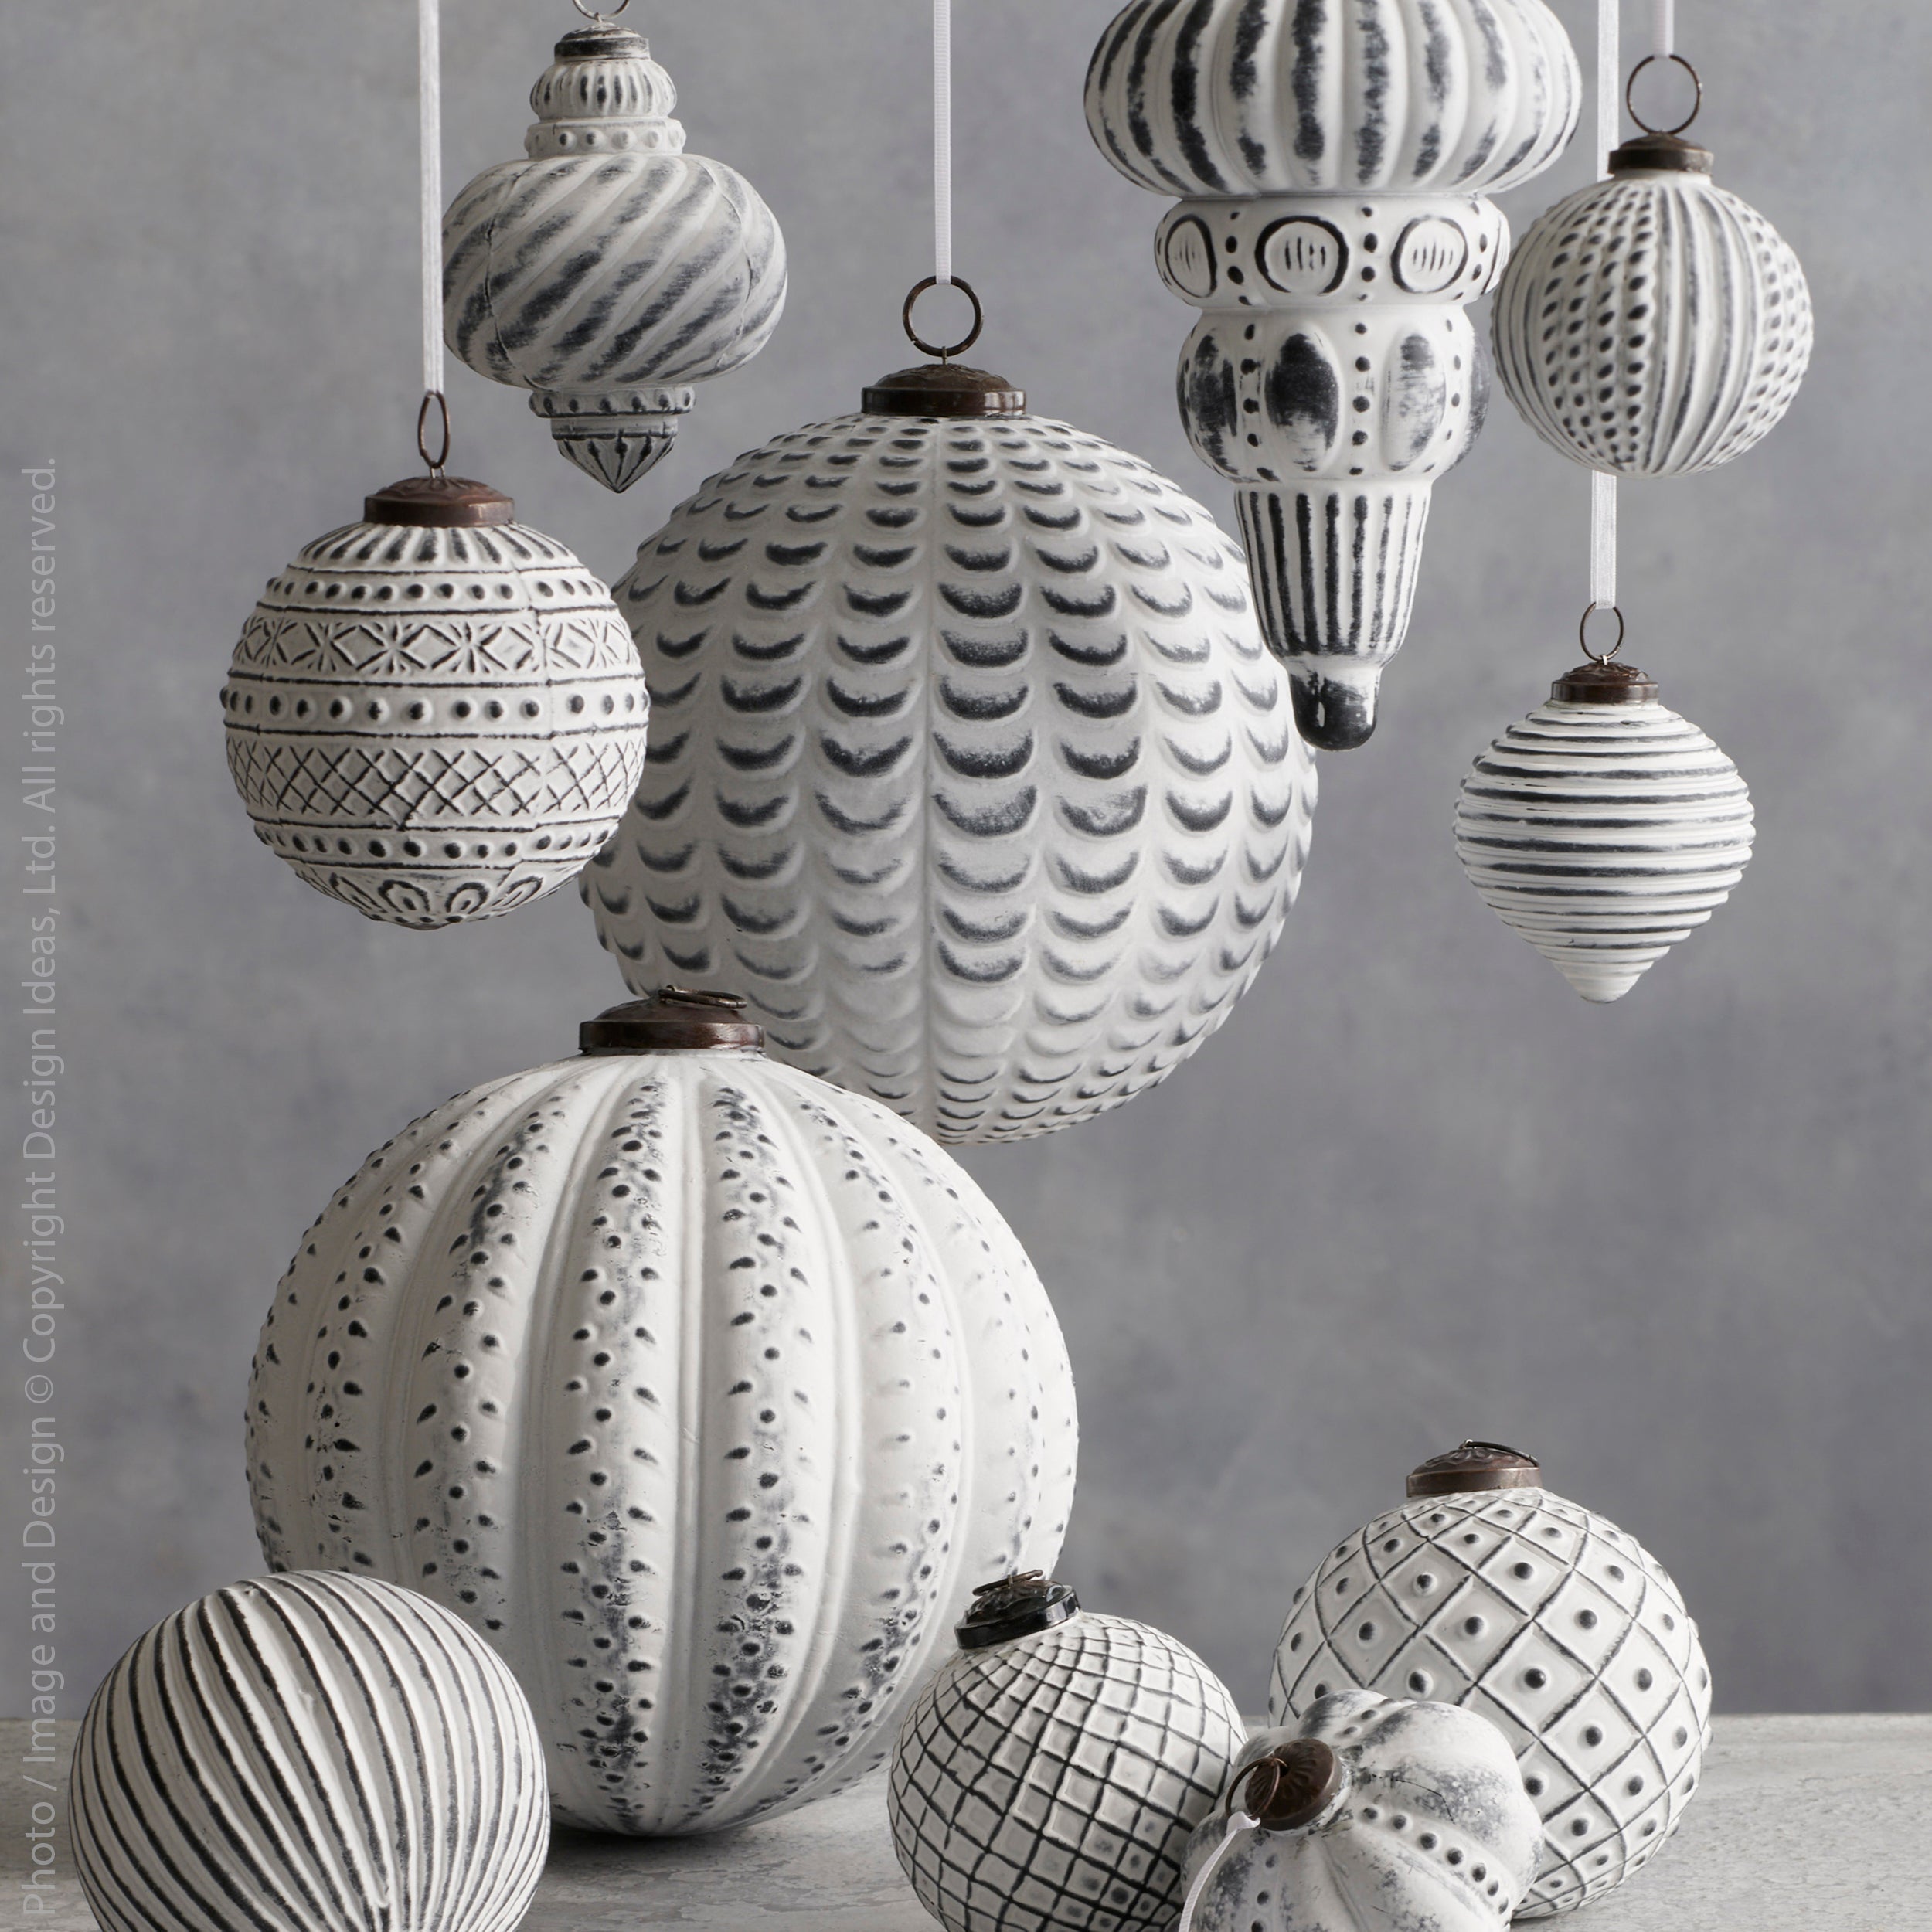 Breckenridge Sarstad Glass Ornament Natural Color | Image 2 | From the Breckenridge Collection | Exquisitely constructed with natural glass for long lasting use | Available in white color | texxture home